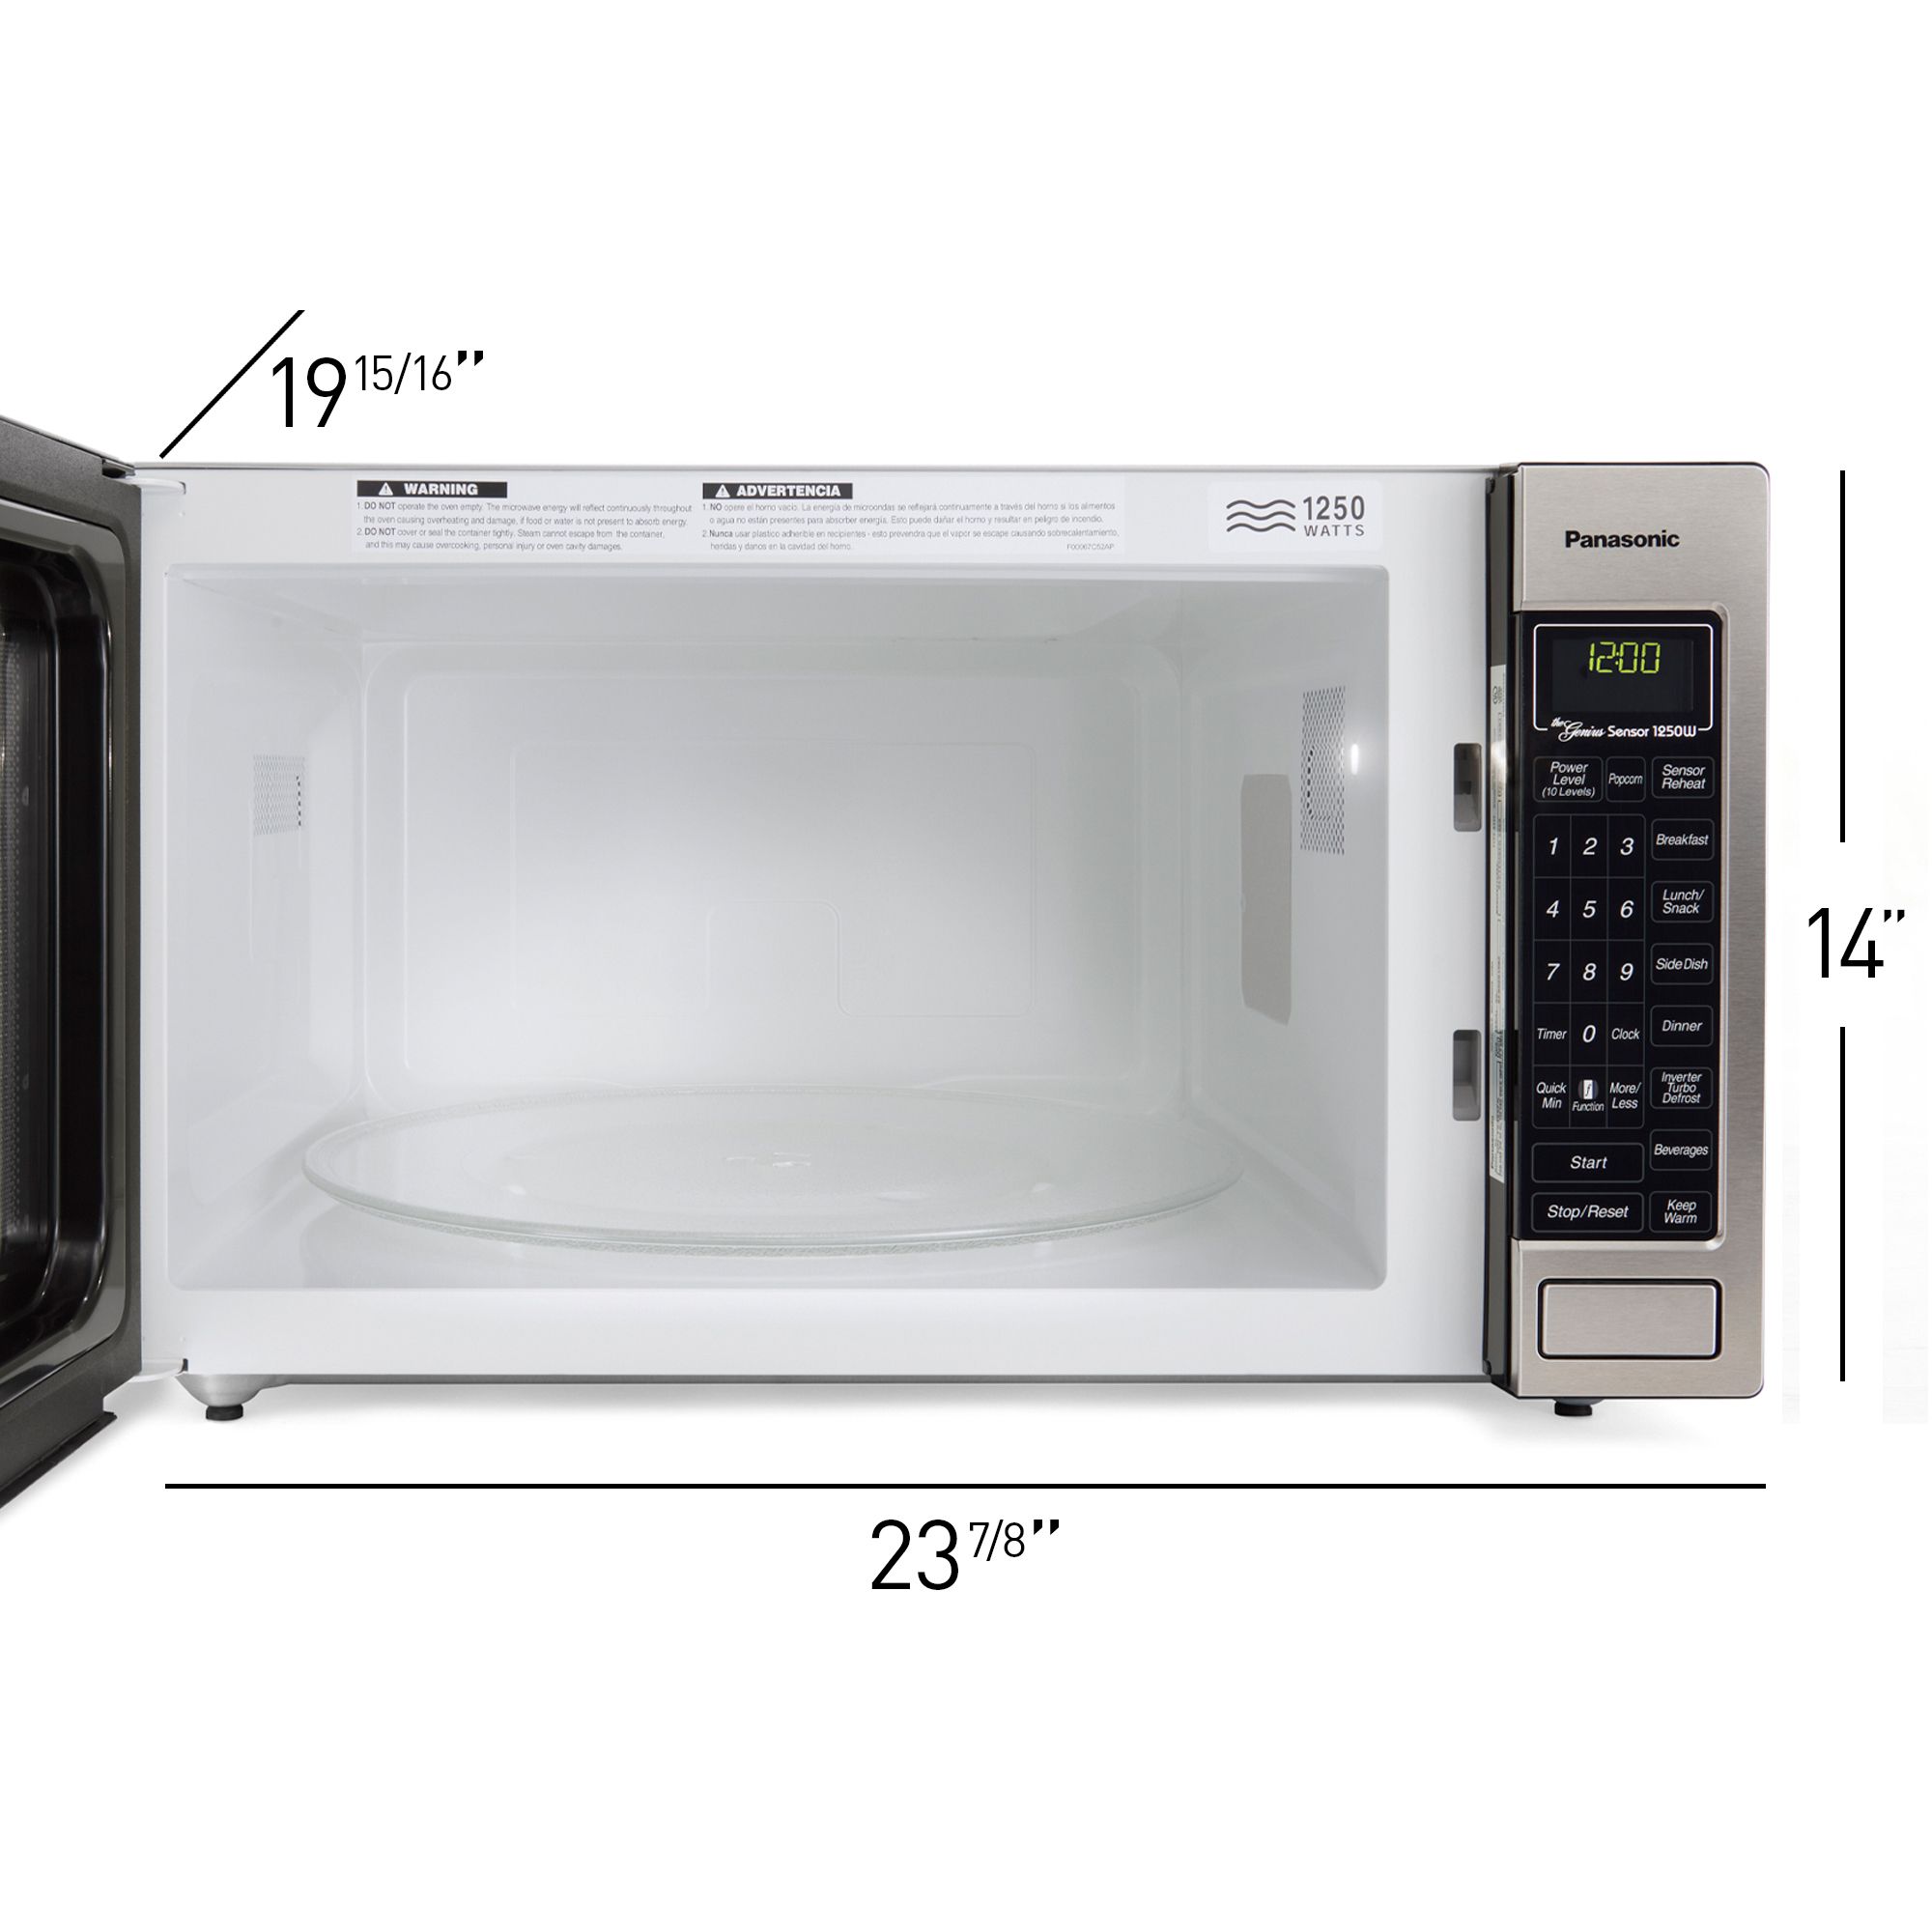 Panasonic NN-T945SF 2.2 cu. ft. 1250W Stainless Steel Countertop Microwave  Oven